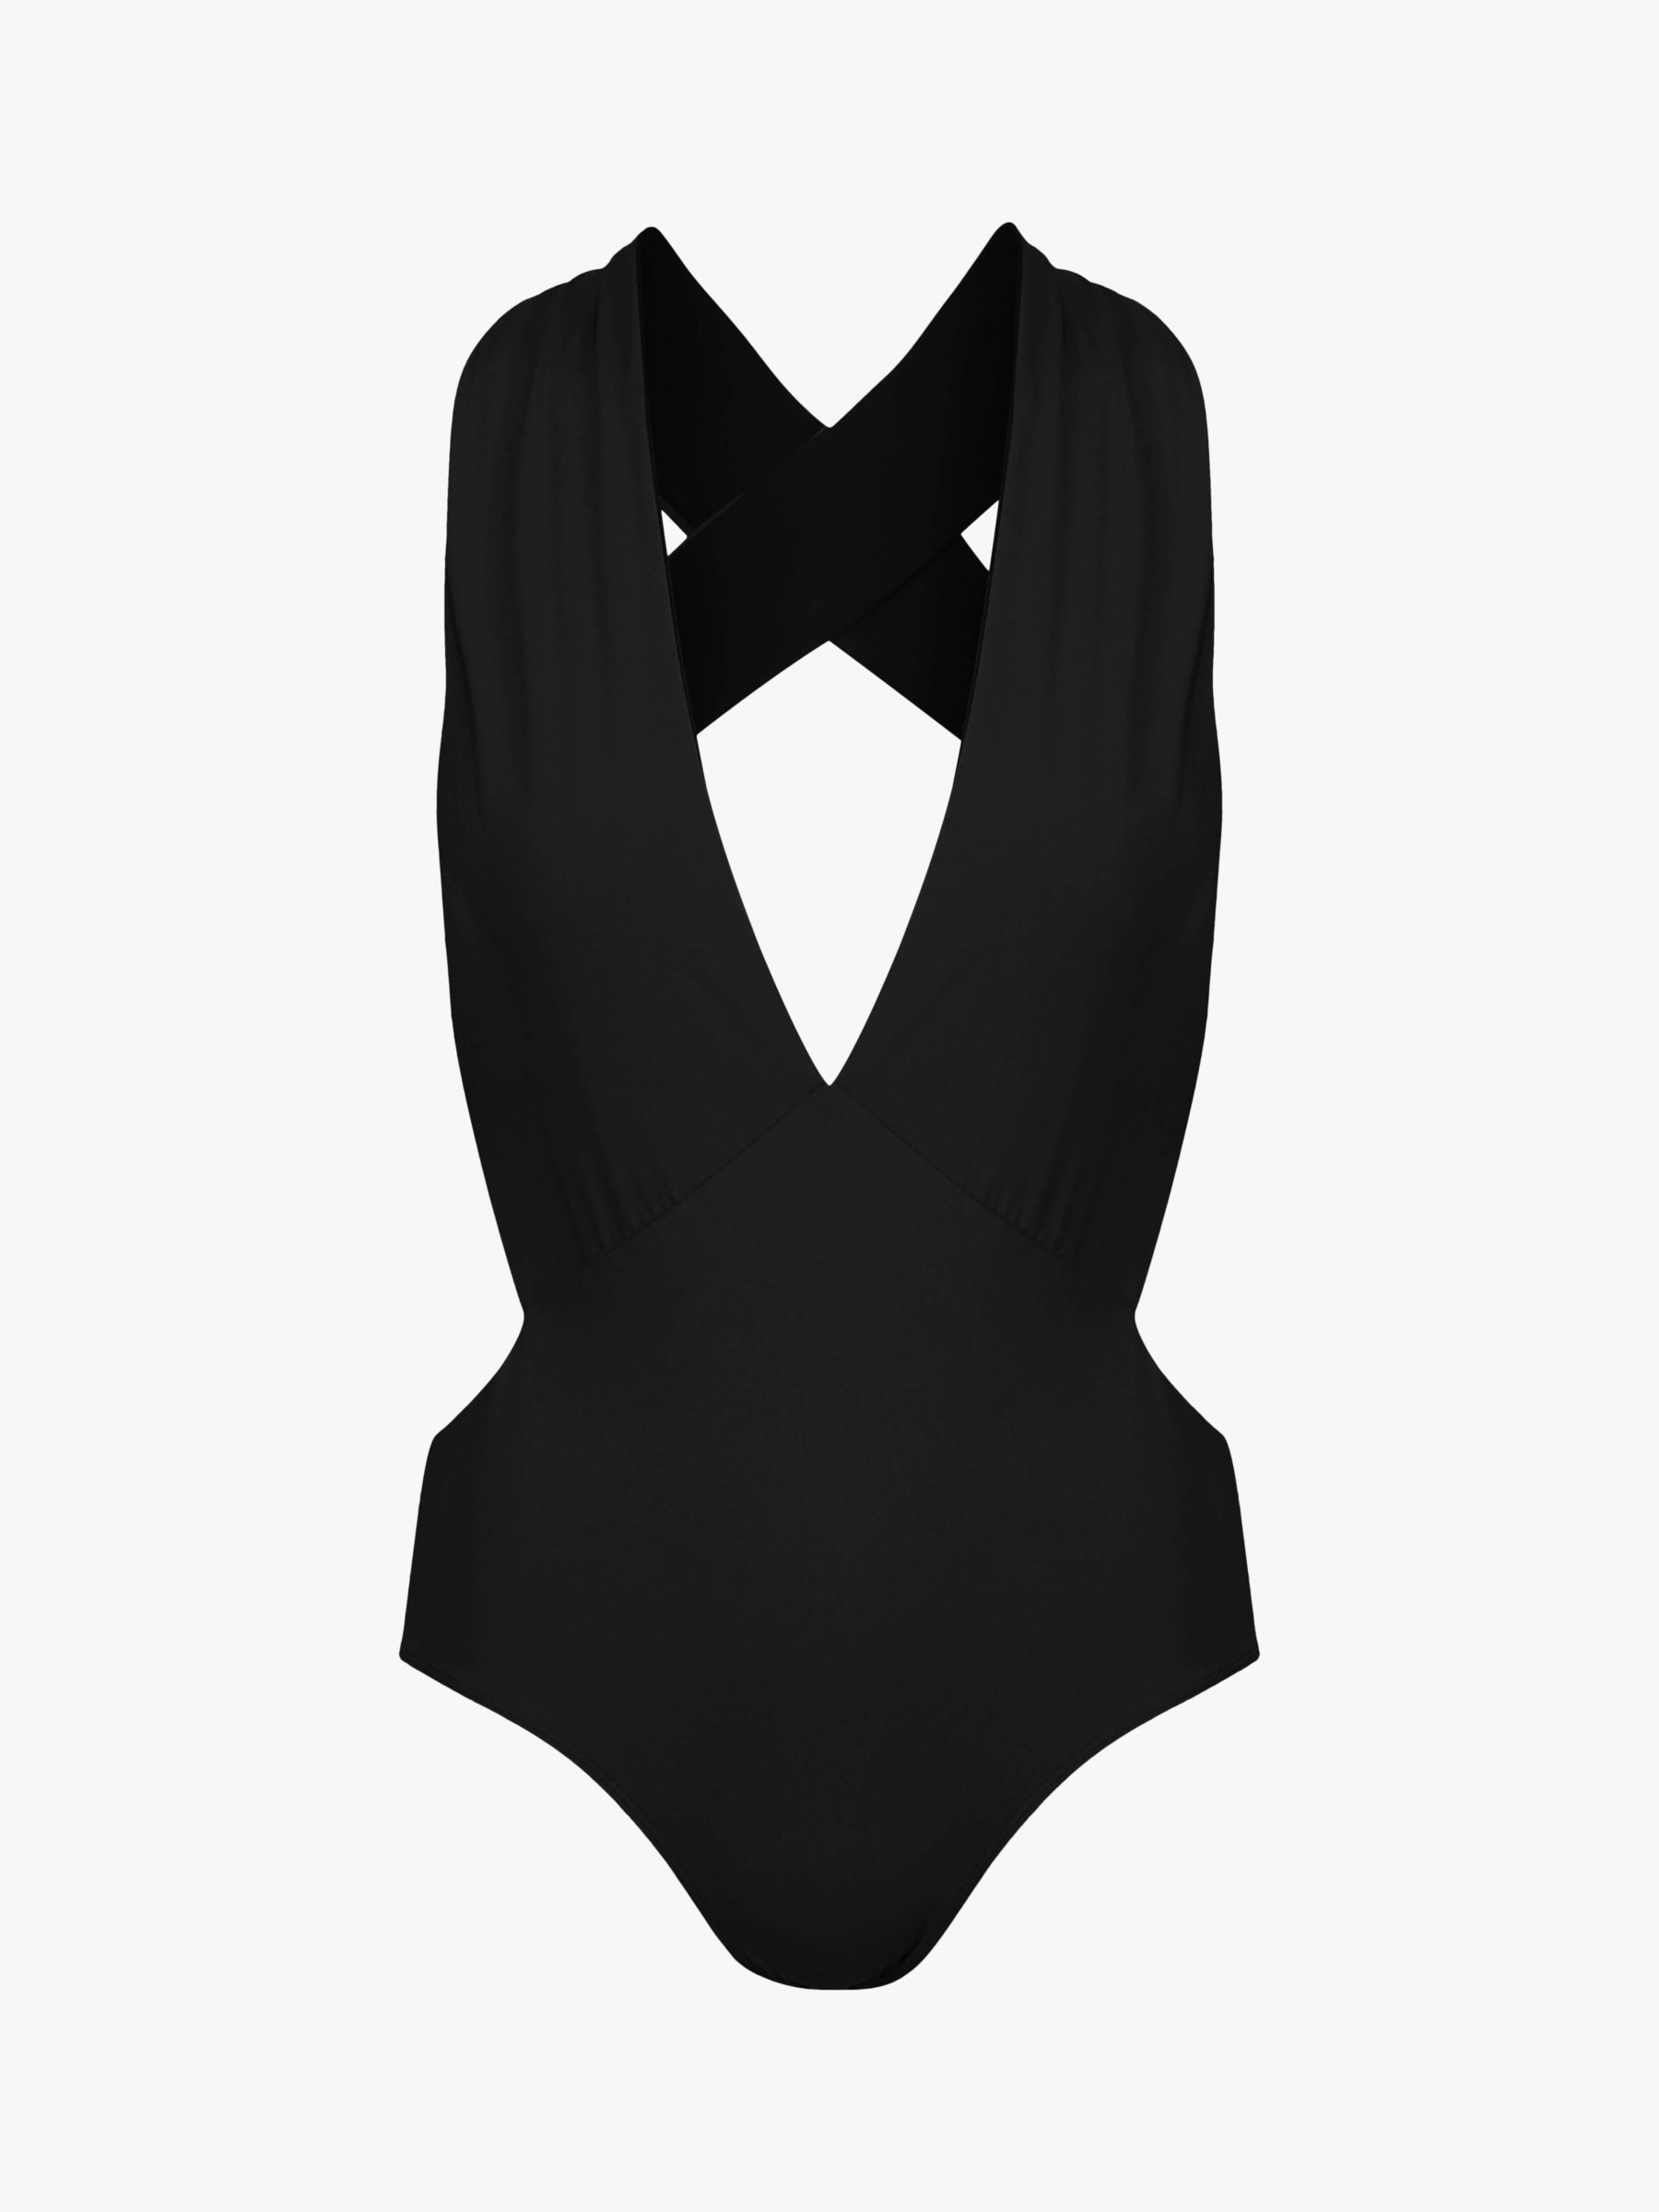 Davy J The Statement Cut Out Swimsuit, Black, 8-10